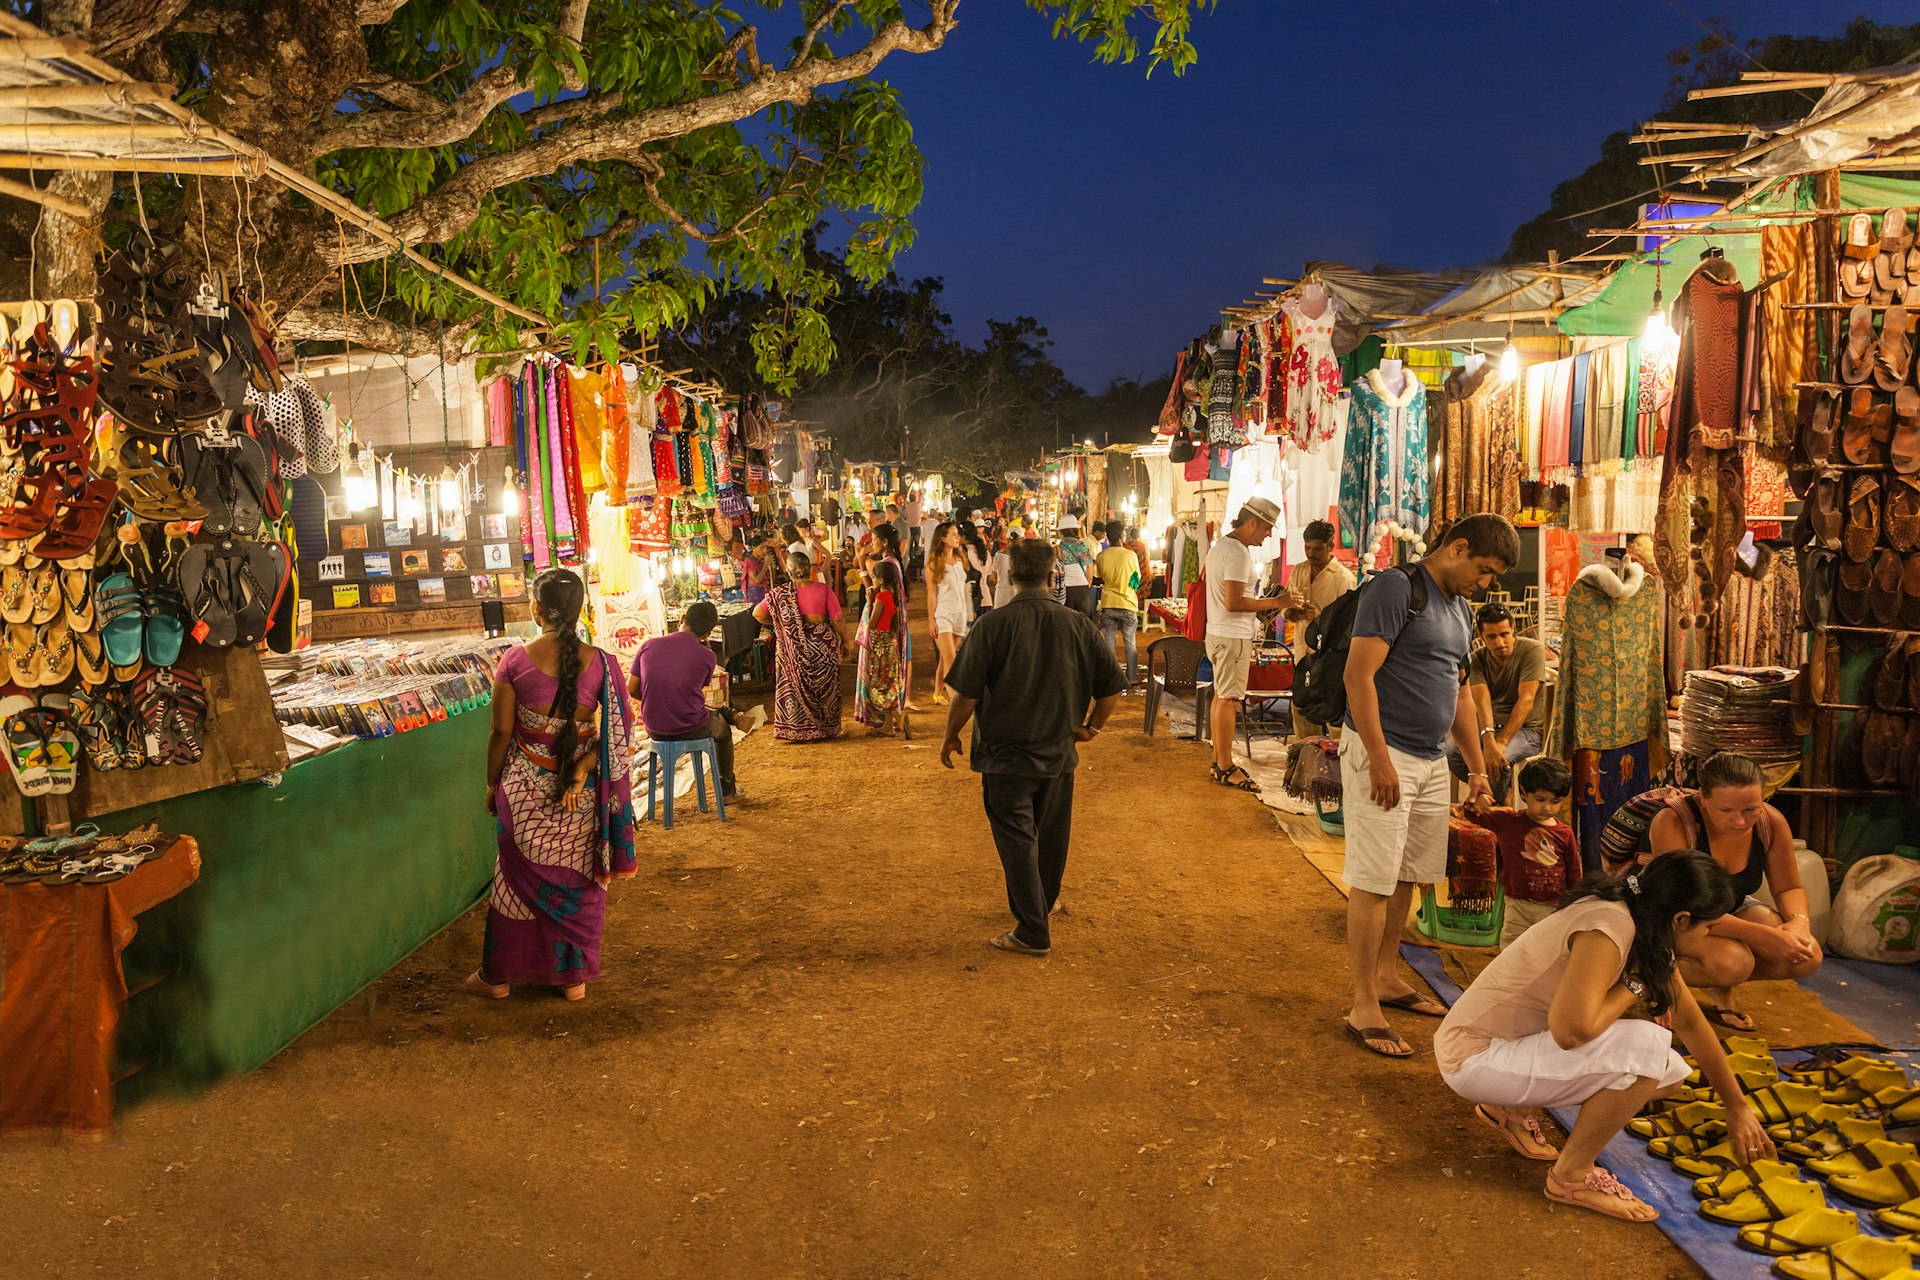 Several shoppers look at the clothes, shoes and textiles on display in the stalls at Goa Night Market, Goa, India